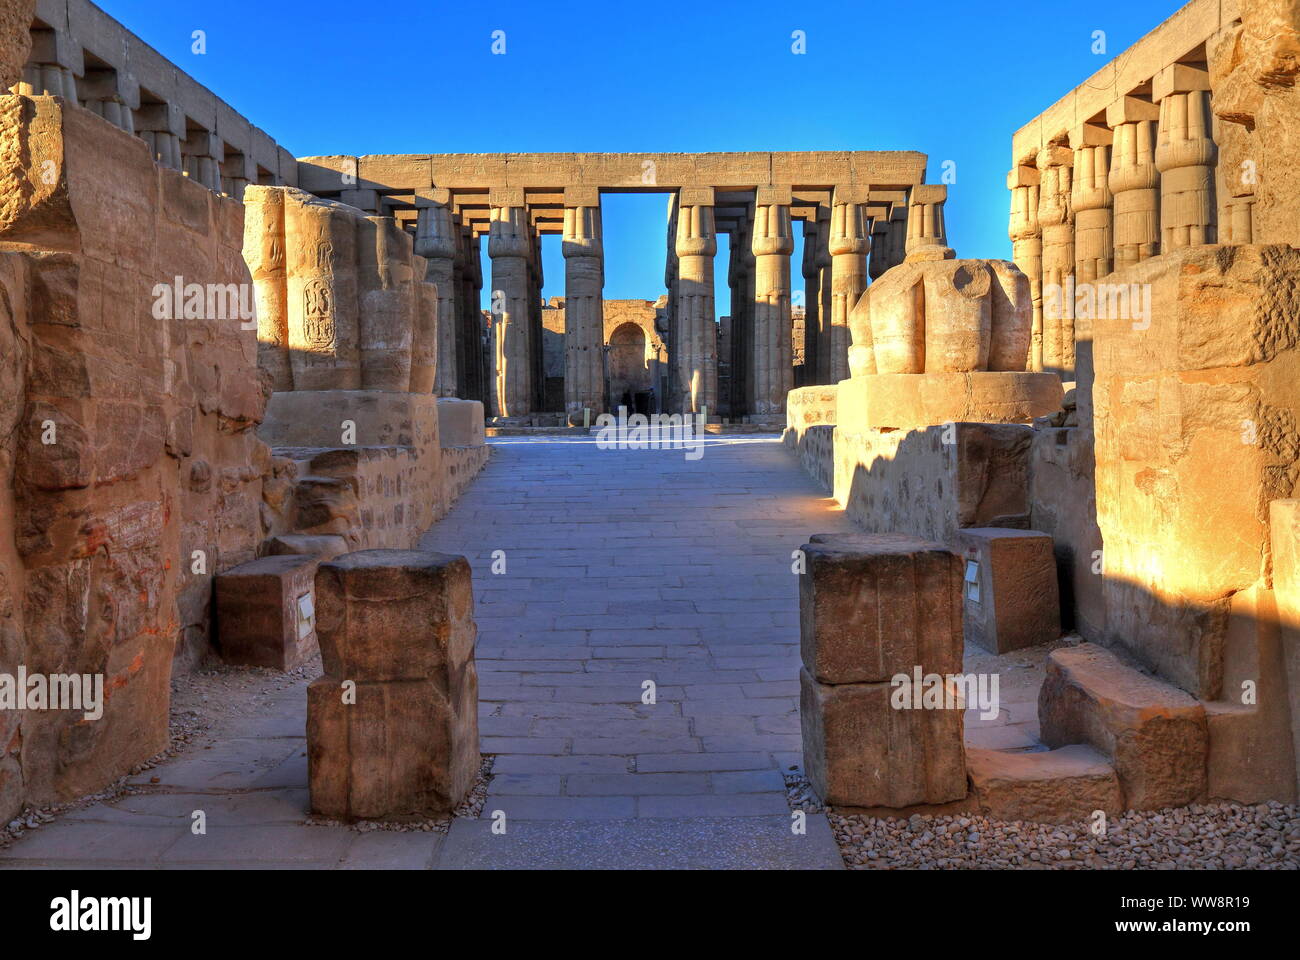 Second court in the Luxor temple, Luxor, Upper Egypt, Egypt Stock Photo